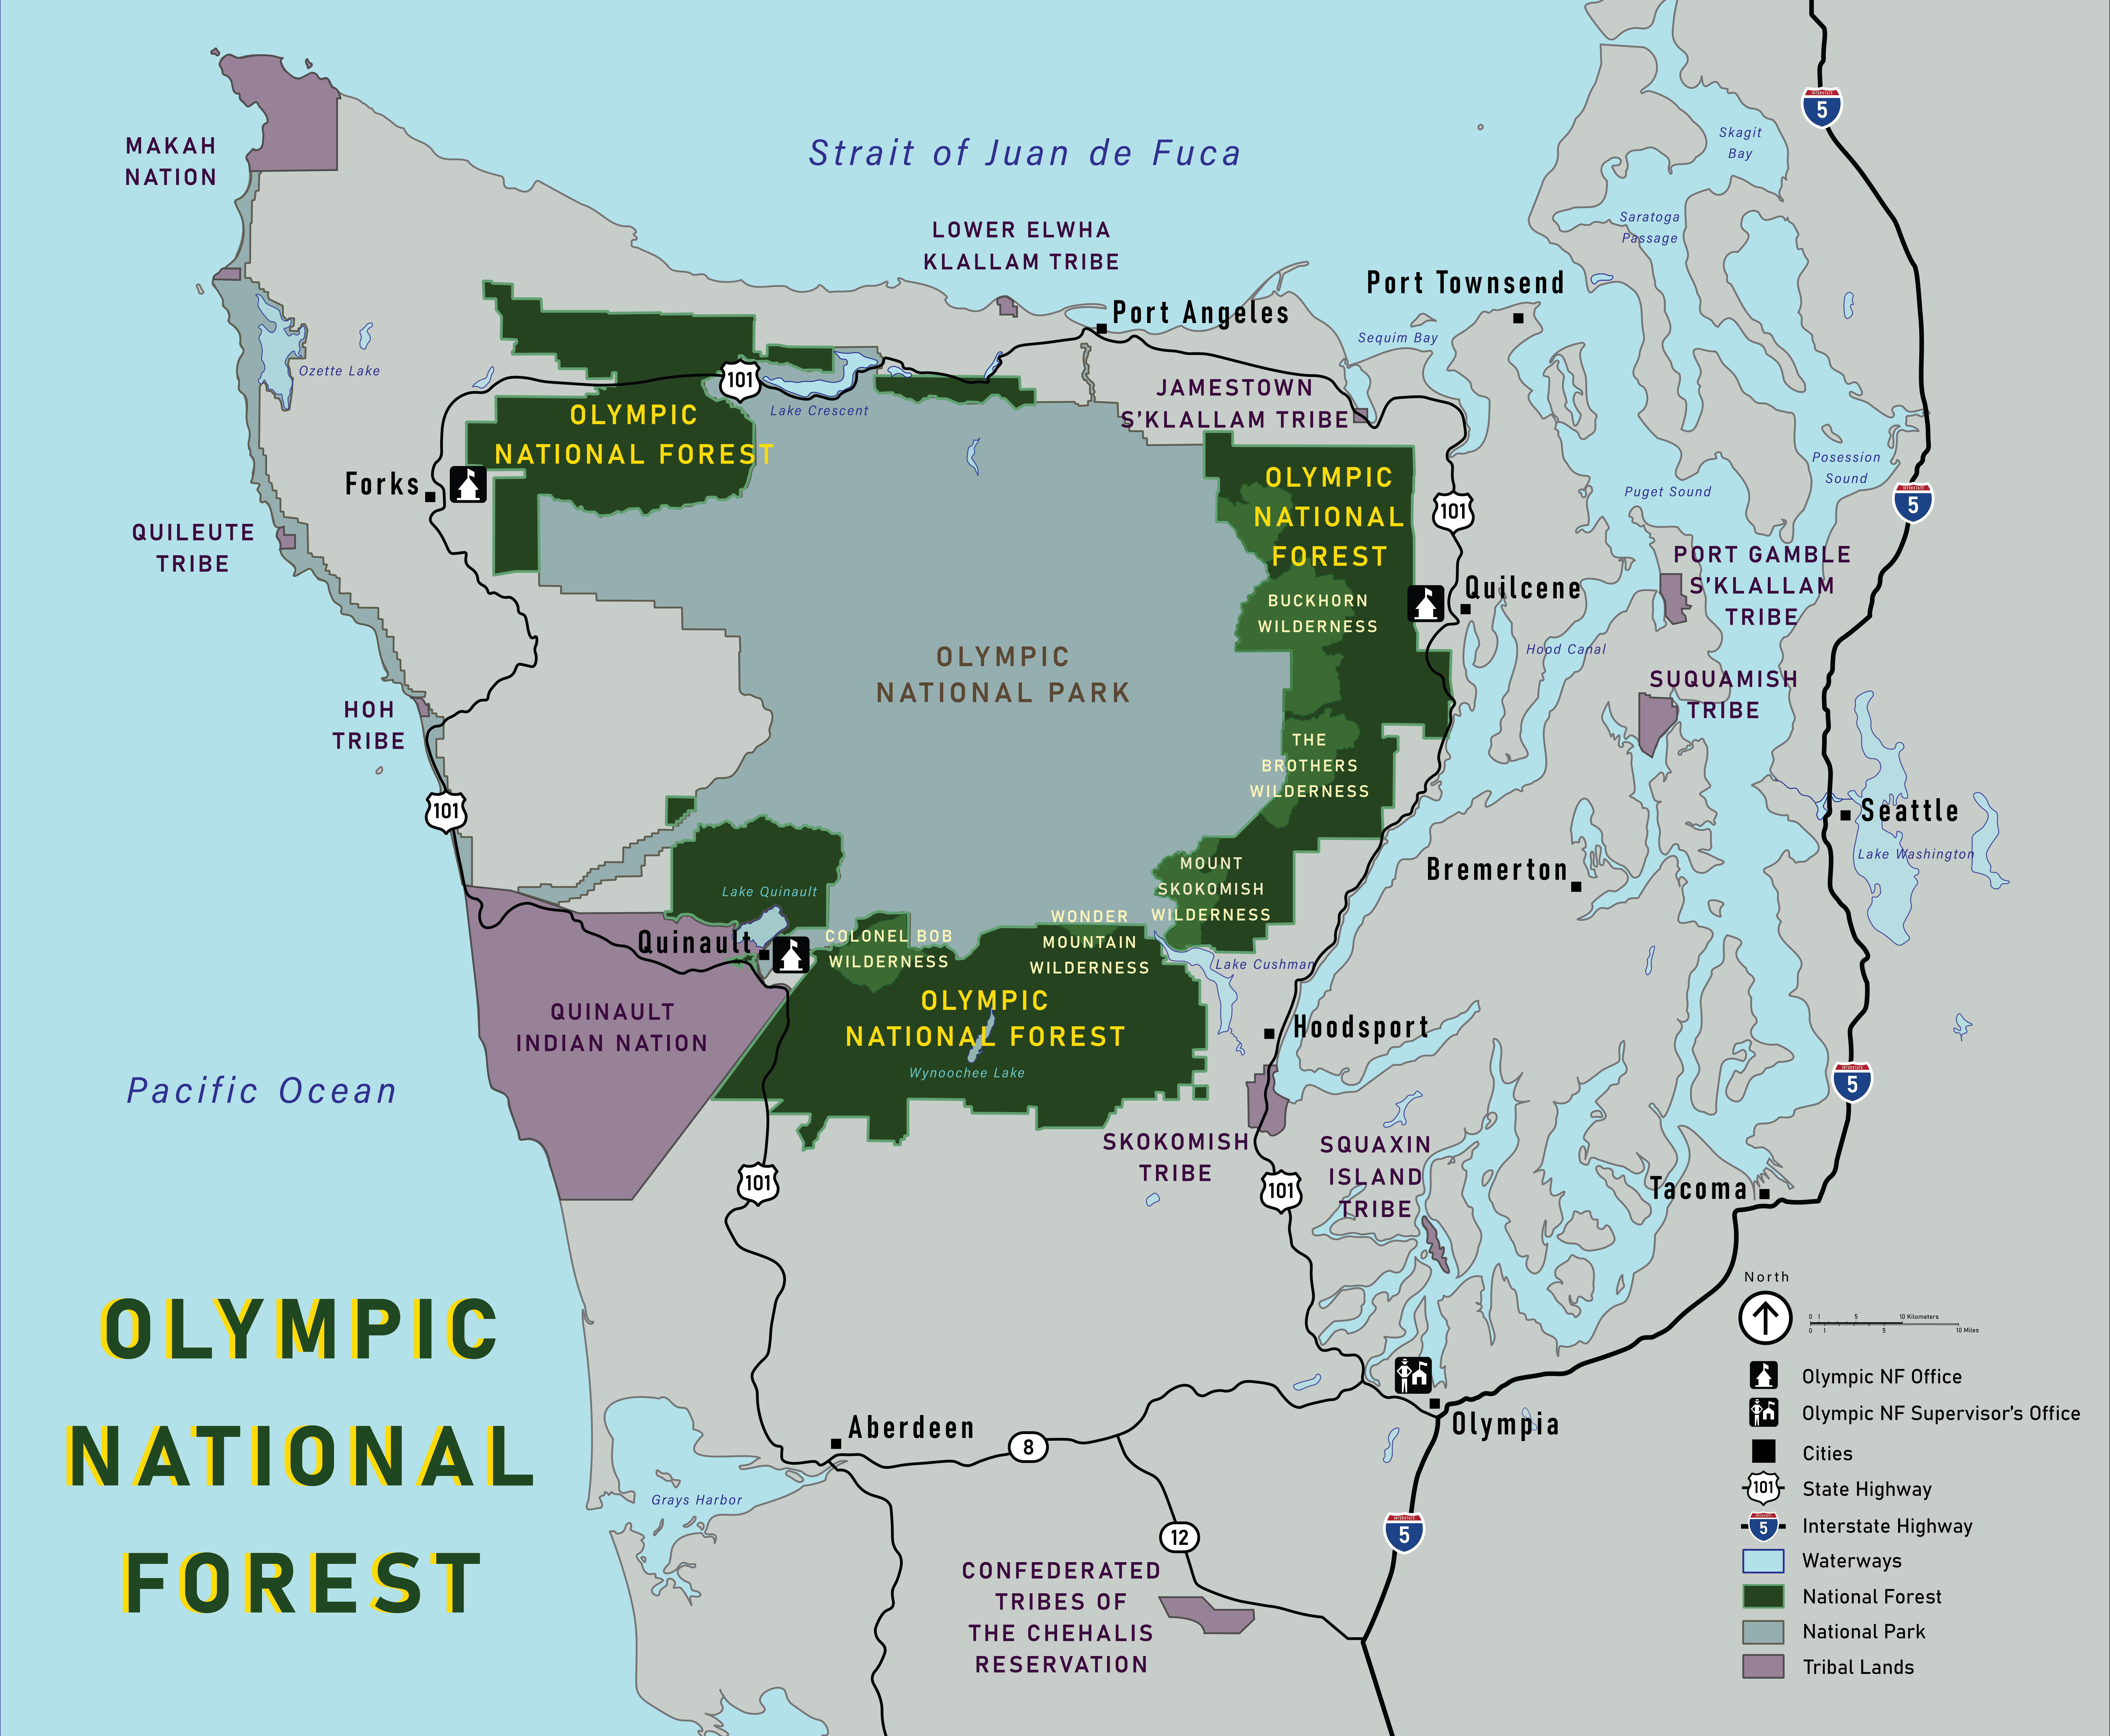 Overview map of the Olympic Peninsula with National Forest, Park, & Tribal lands, waterways & cities